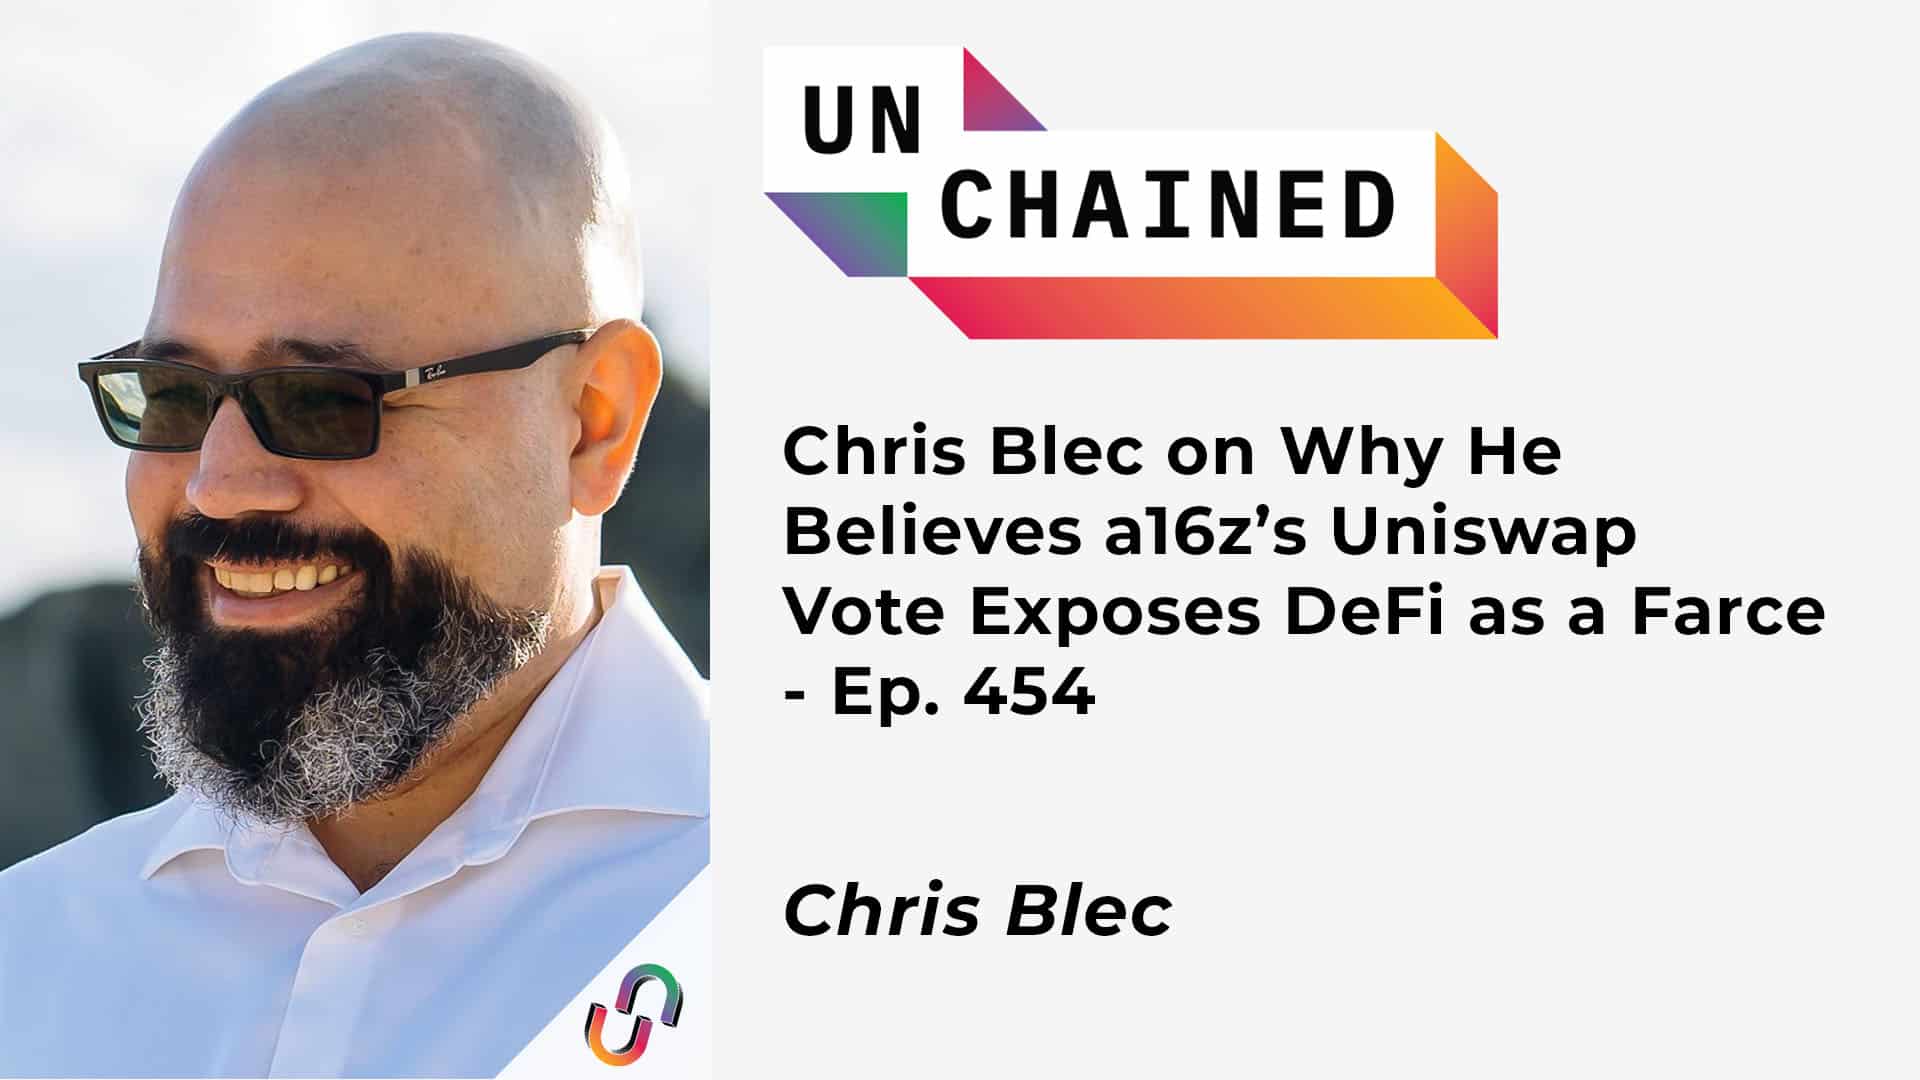 Chris Blec on Why He Believes a16z’s Uniswap Vote Exposes DeFi as a Farce - Ep. 454